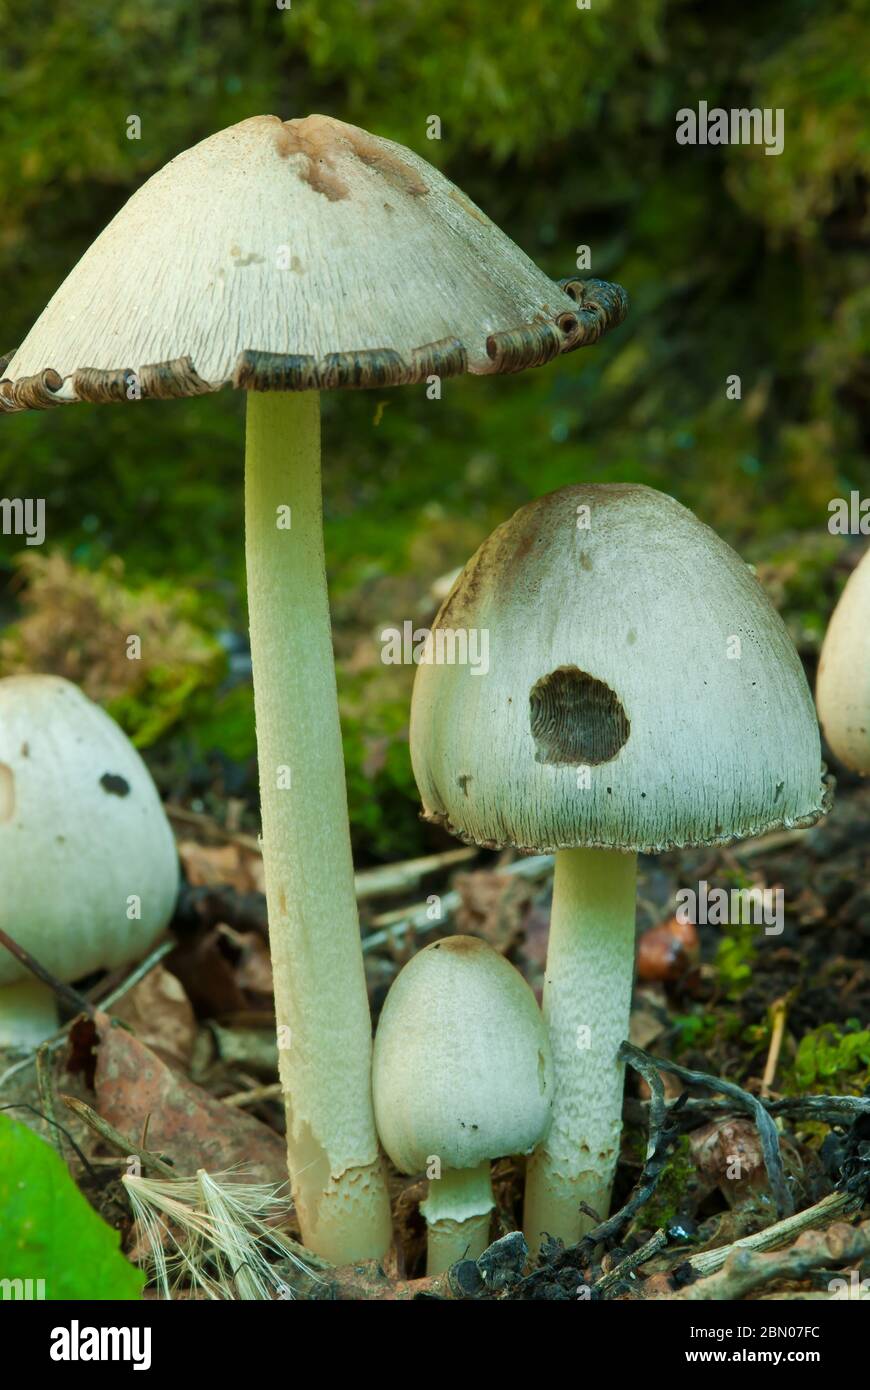 Tippler's bane,Coprinus atramentarius, a common mushroom that should not be consumed with alcohol Stock Photo